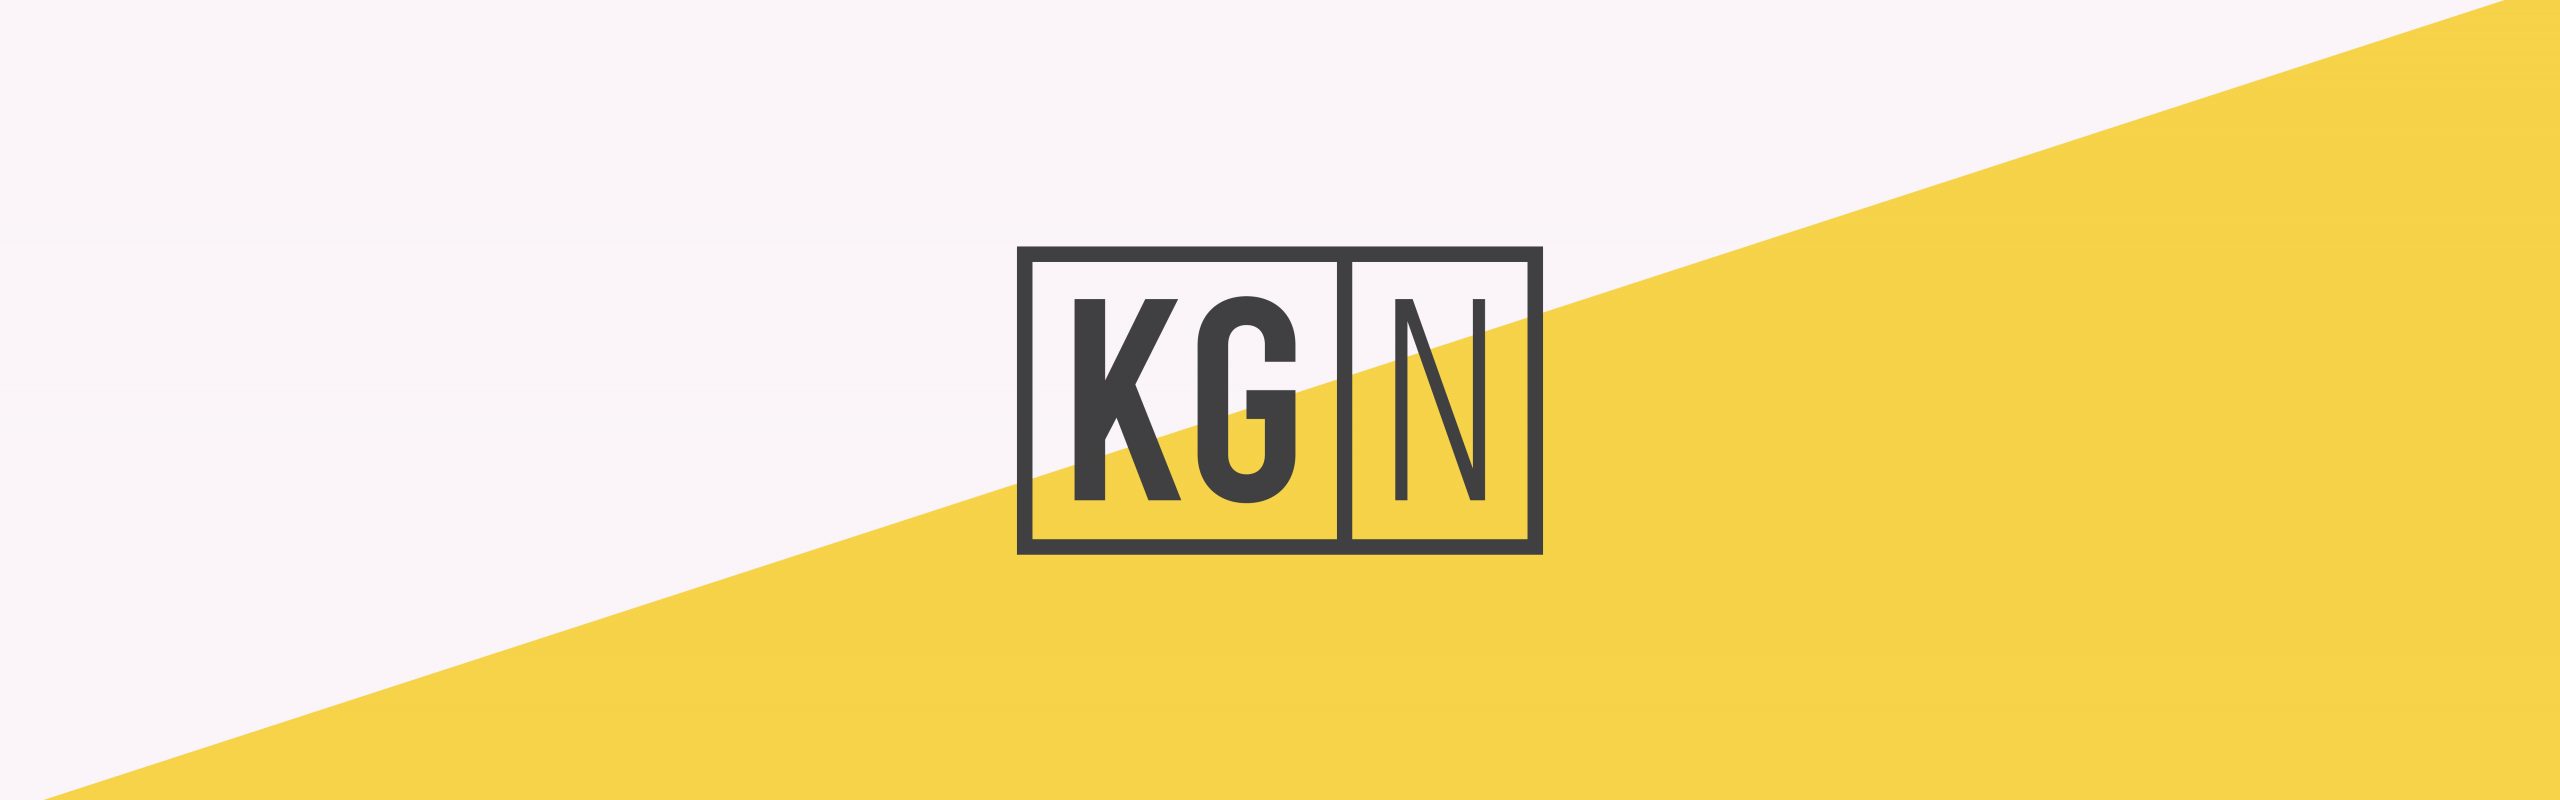 The image shows a square frame against a background split diagonally between white on the top left and yellow on the bottom right. Inside the frame, the letters 'K', 'G', 'N',